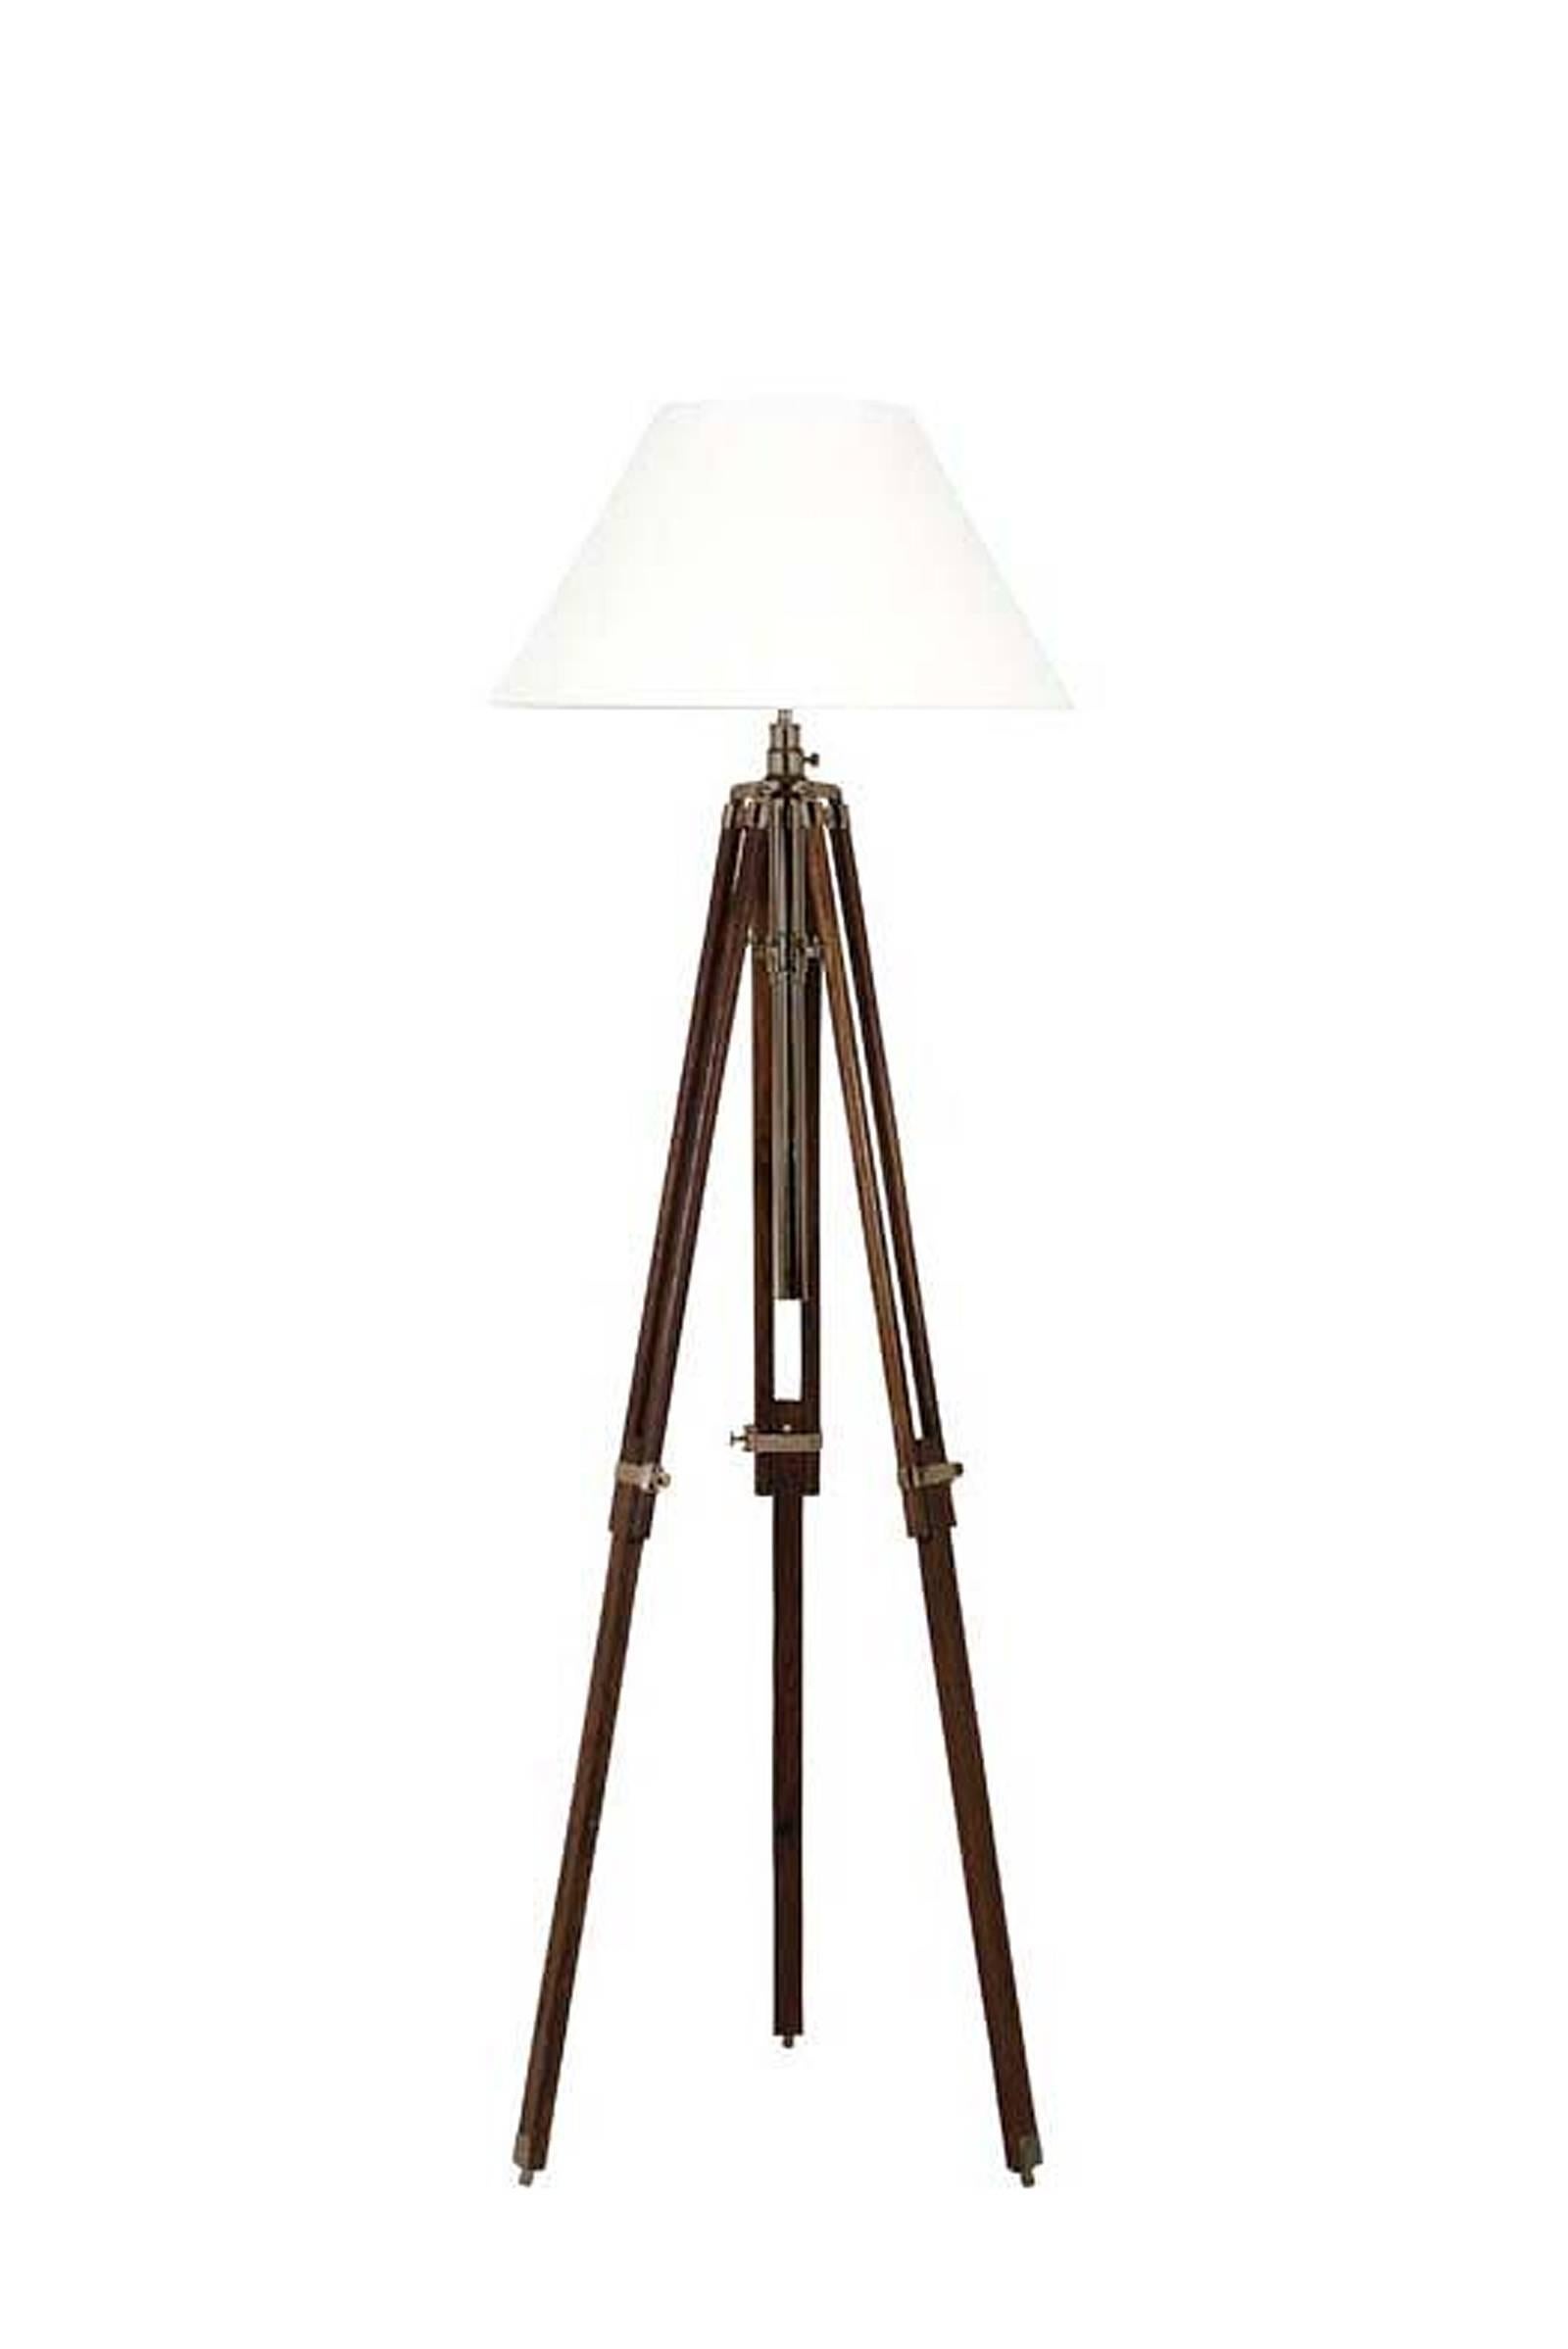 Floor lamp tripod with telescopic black legs, 
wood and nickel, black or white shade.
Adjustable height.
